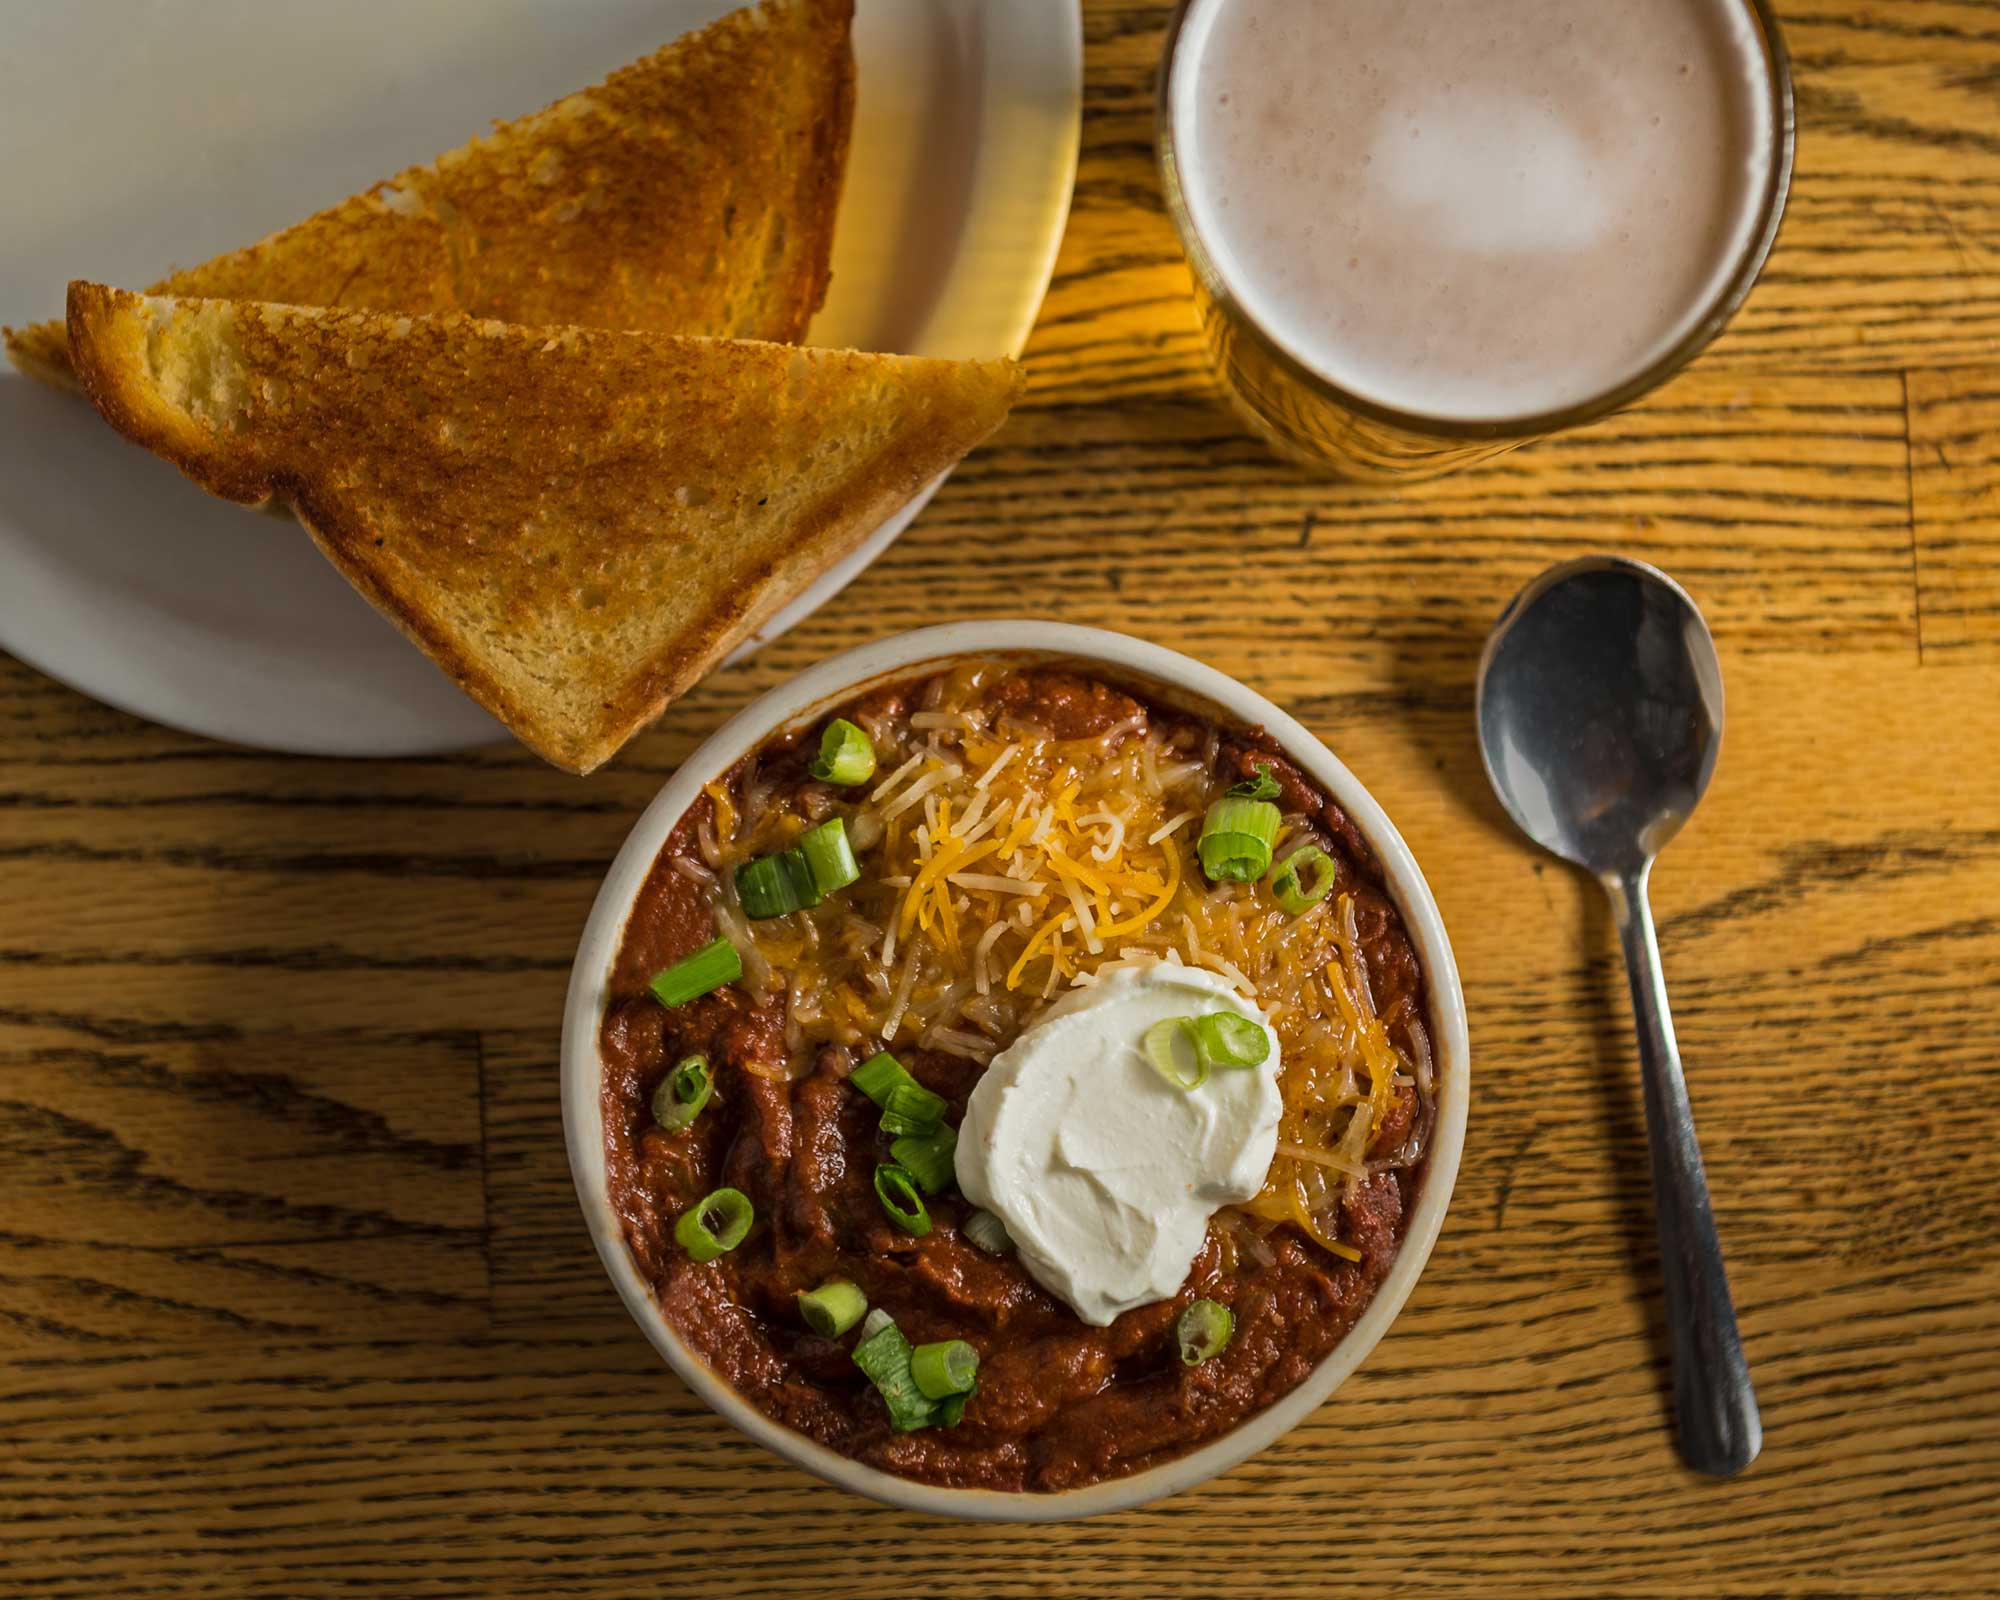 The Loon Cafe - Pinto’s Diablo Chili